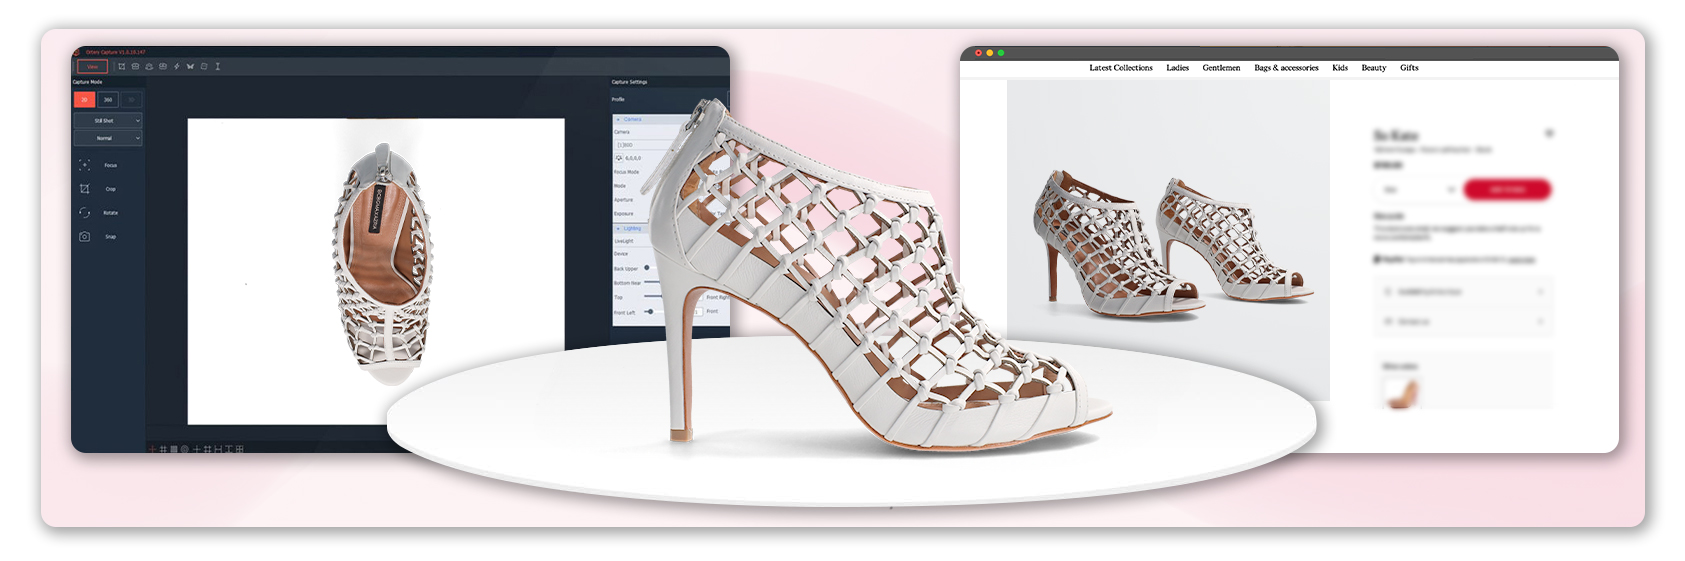 software-controlled-heels